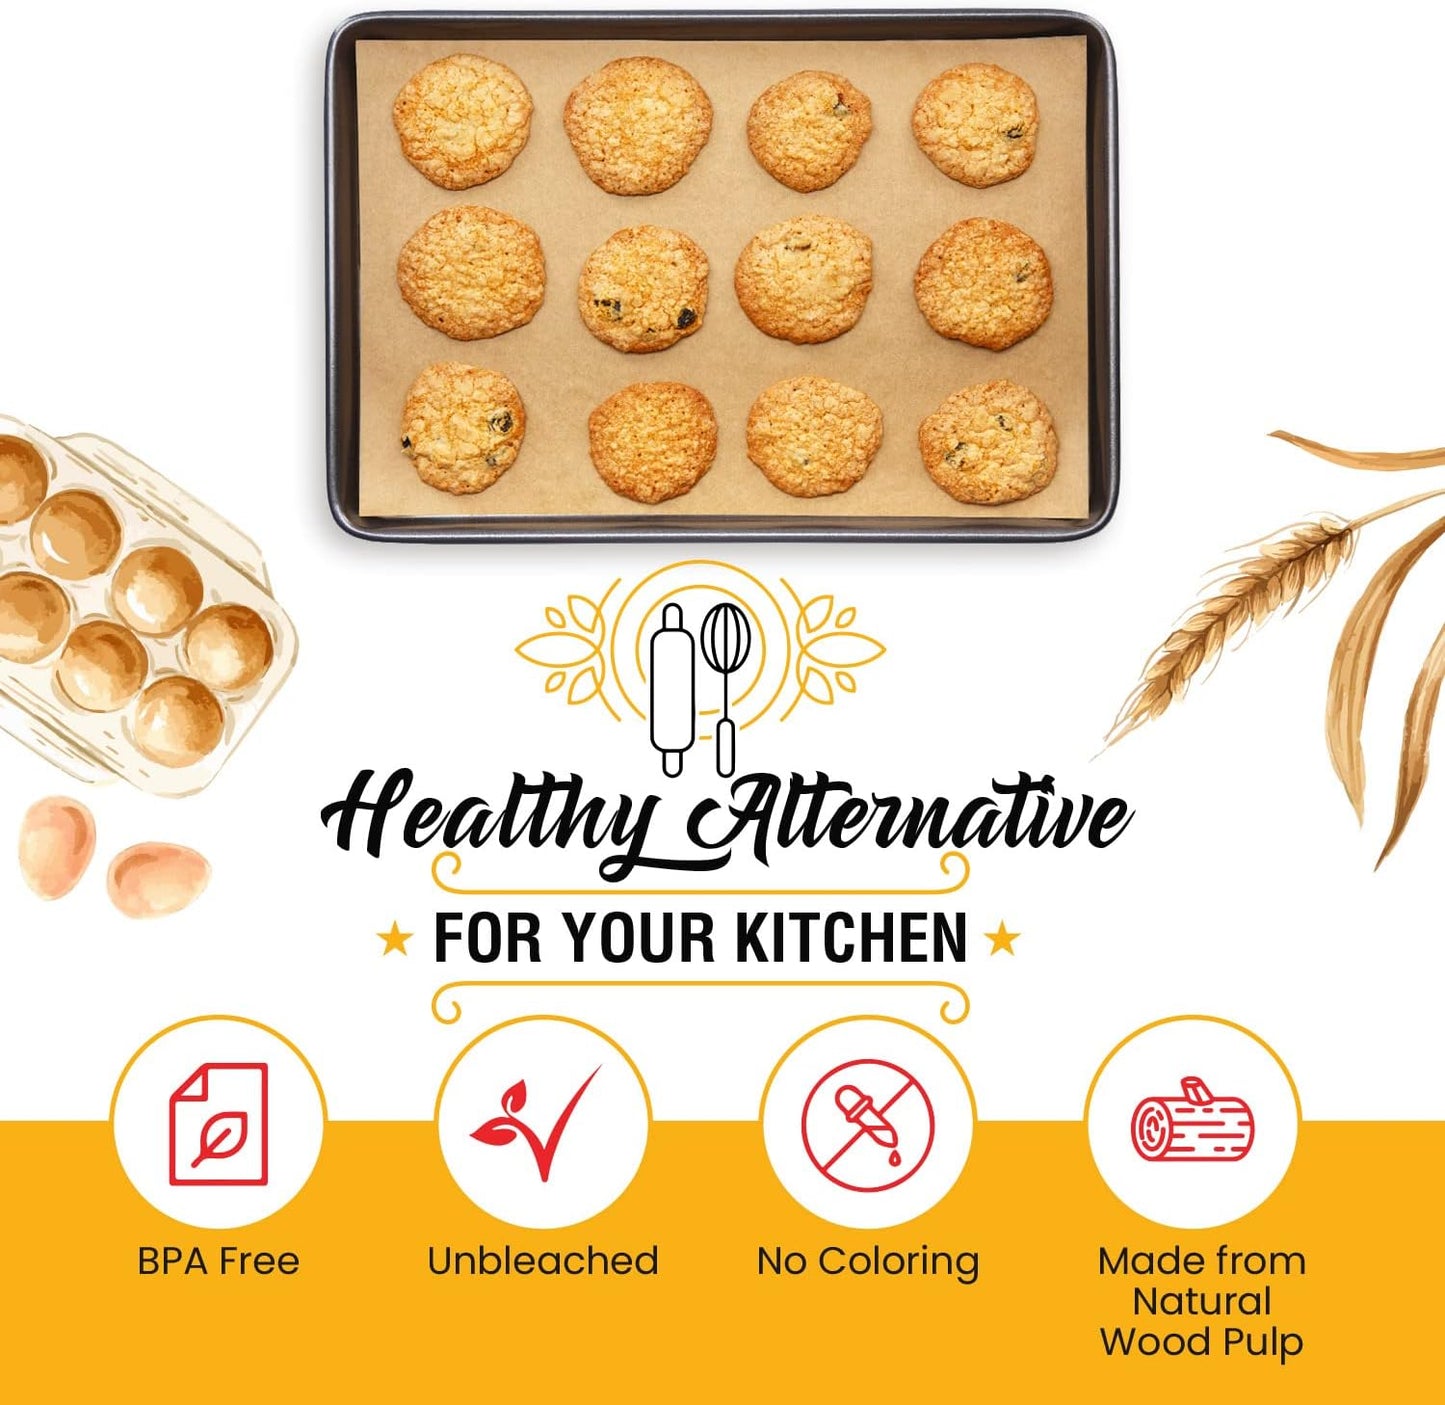 Parchment Paper Baking Sheets by Baker's Signature | Precut Non-Stick & Unbleached - Will Not Curl or Burn - Non-Toxic & Comes in Convenient Packaging - 12x16 Inch Pack of 120